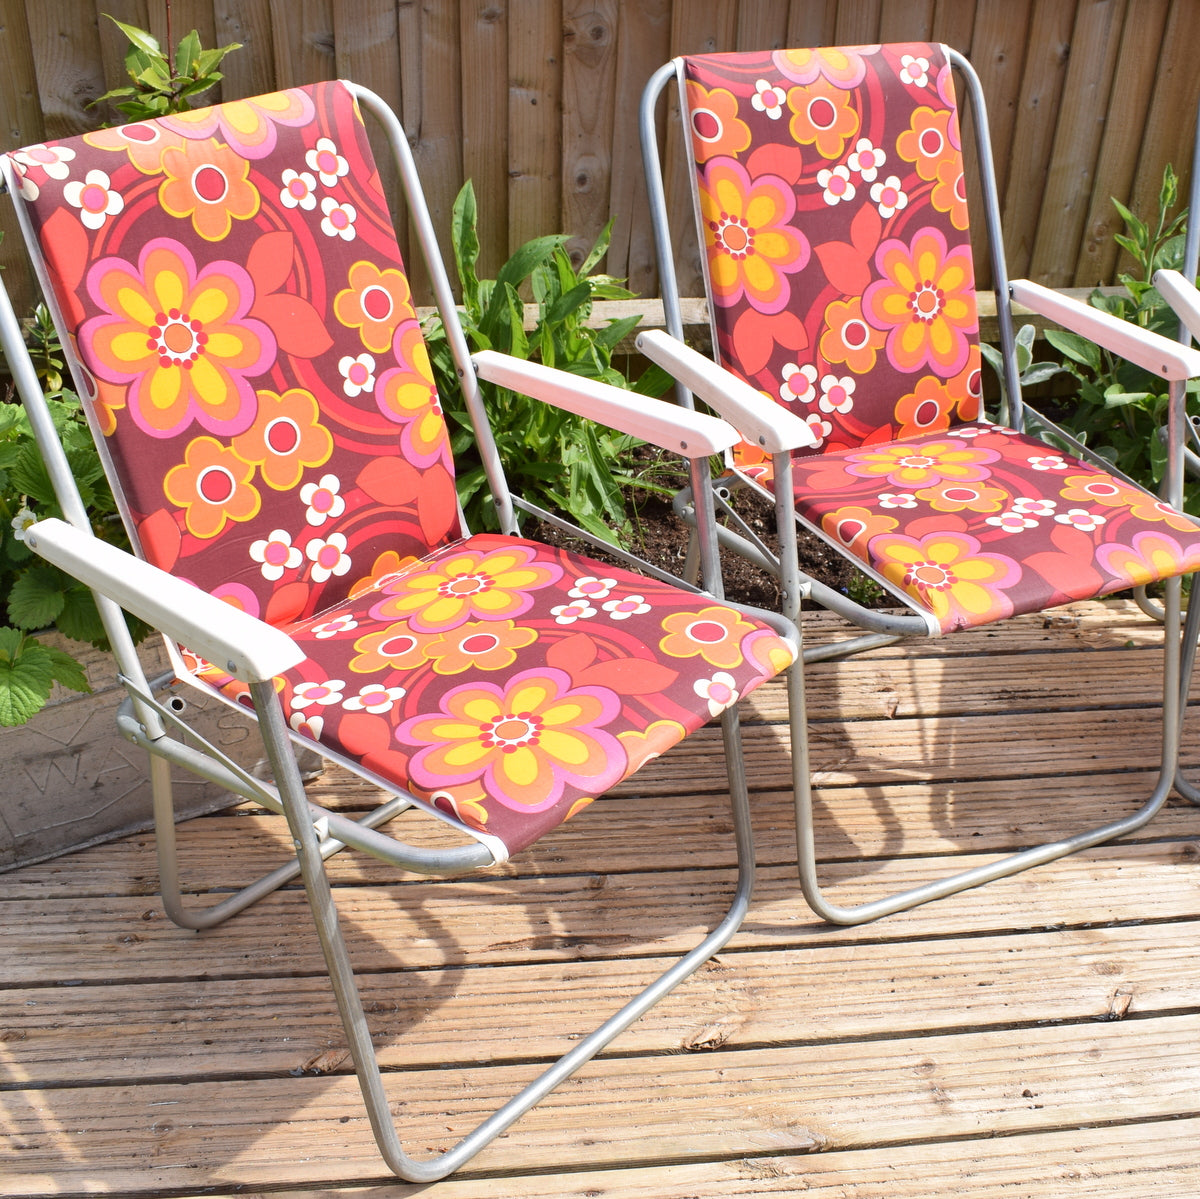 Vintage 1960s Folding, Padded Garden Chairs - Flower Power - Pink & Yellow